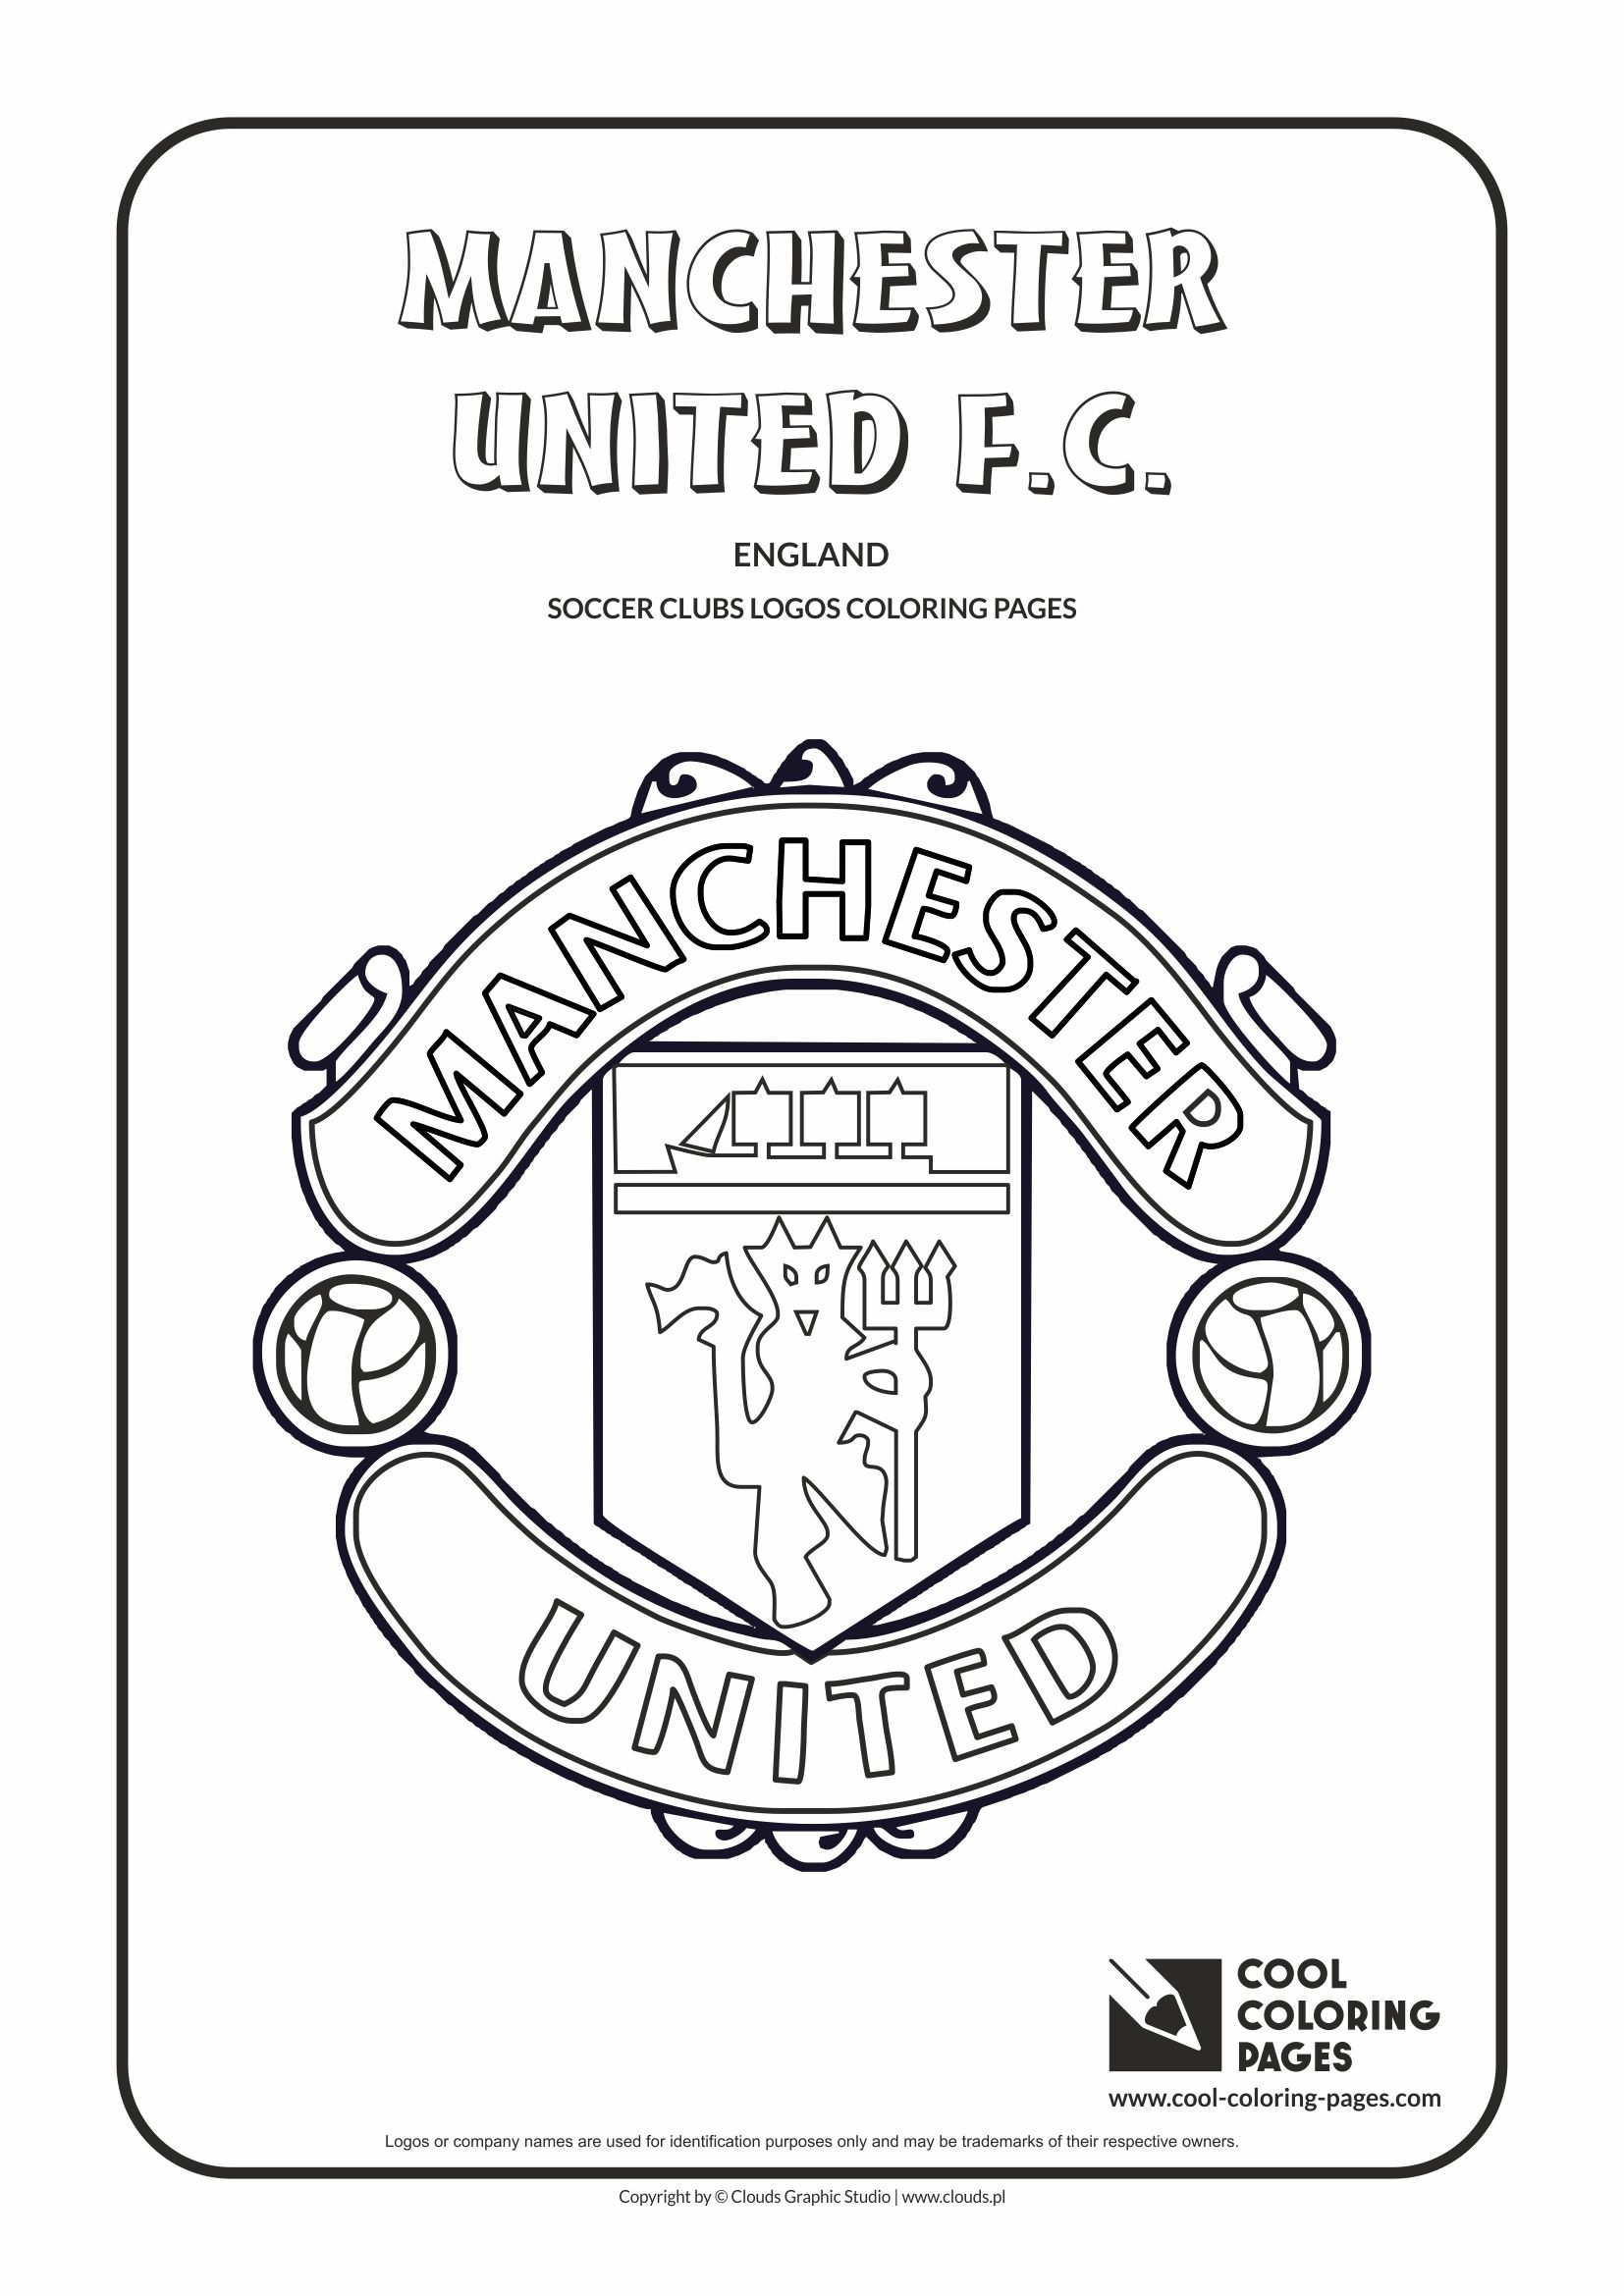 Cool Coloring Pages - Soccer Club Logos / Manchester United F.C. logo / Coloring page with Manchester United F.C. logo